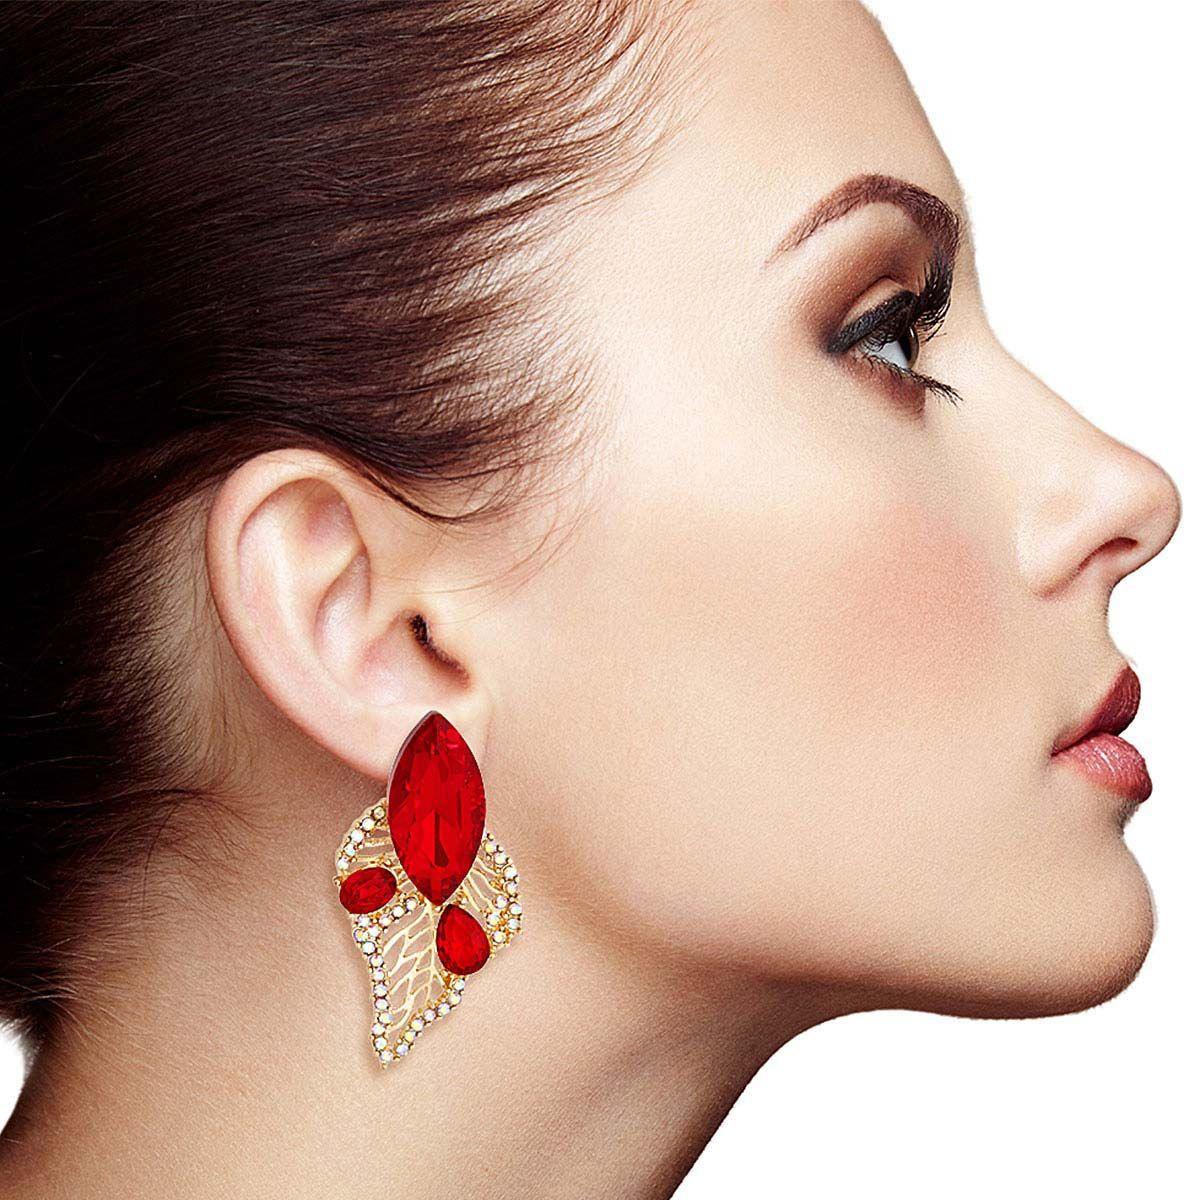 Shop Now: Trendy Red and Gold Leaf Stud Earrings